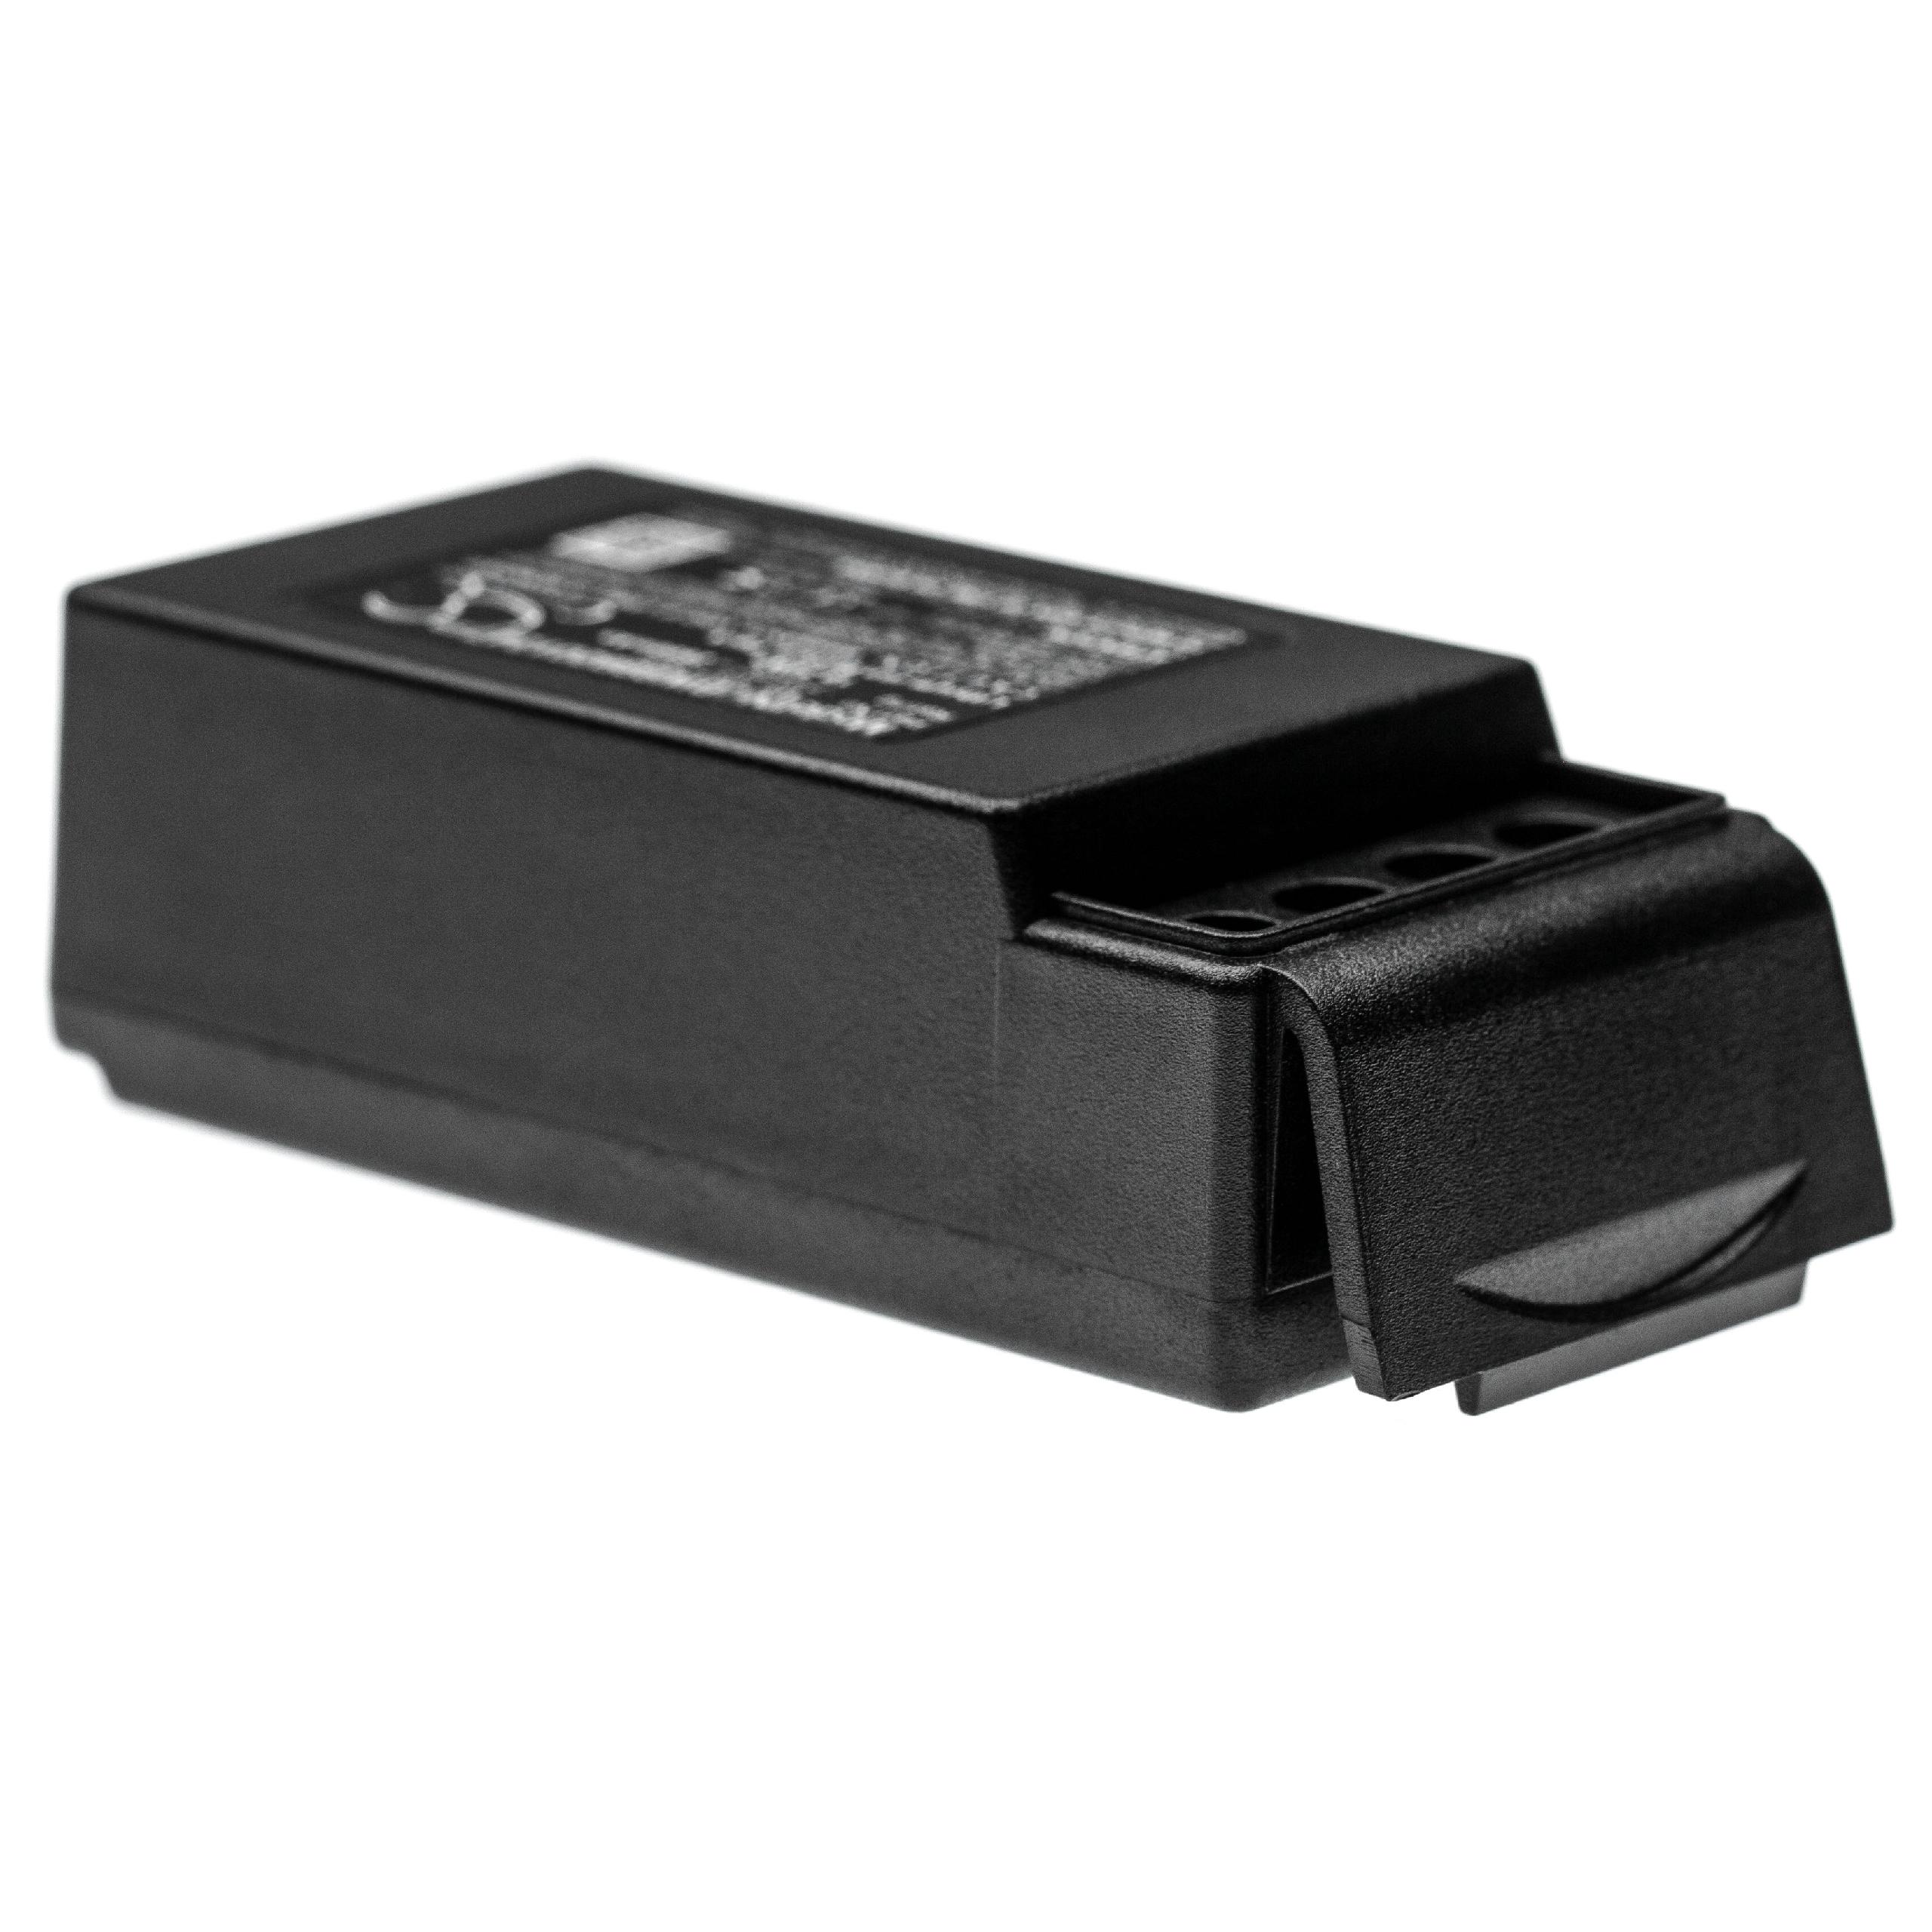 Industrial Remote Control Battery Replacement for Cavotec M5-1051-3600 - 2600mAh 7.4V Li-Ion